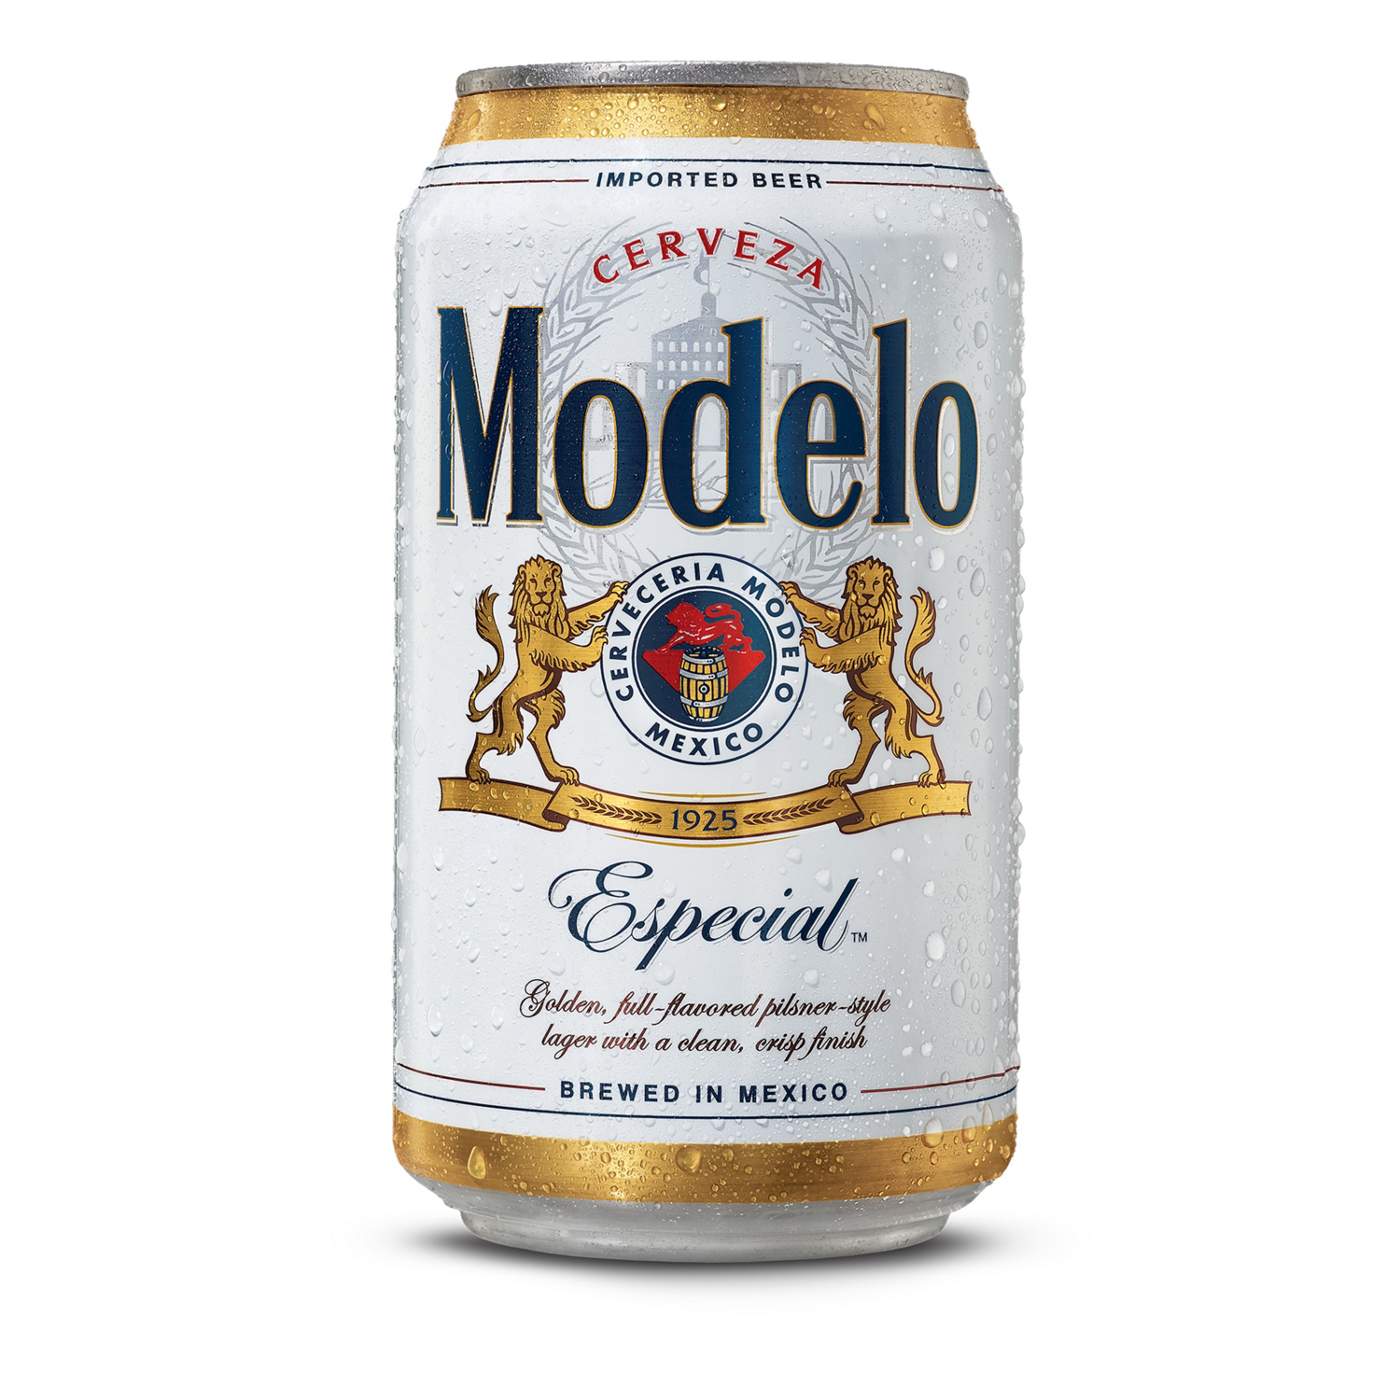 Modelo Especial Mexican Lager Import Beer 12 oz Cans, 6 pk; image 3 of 10